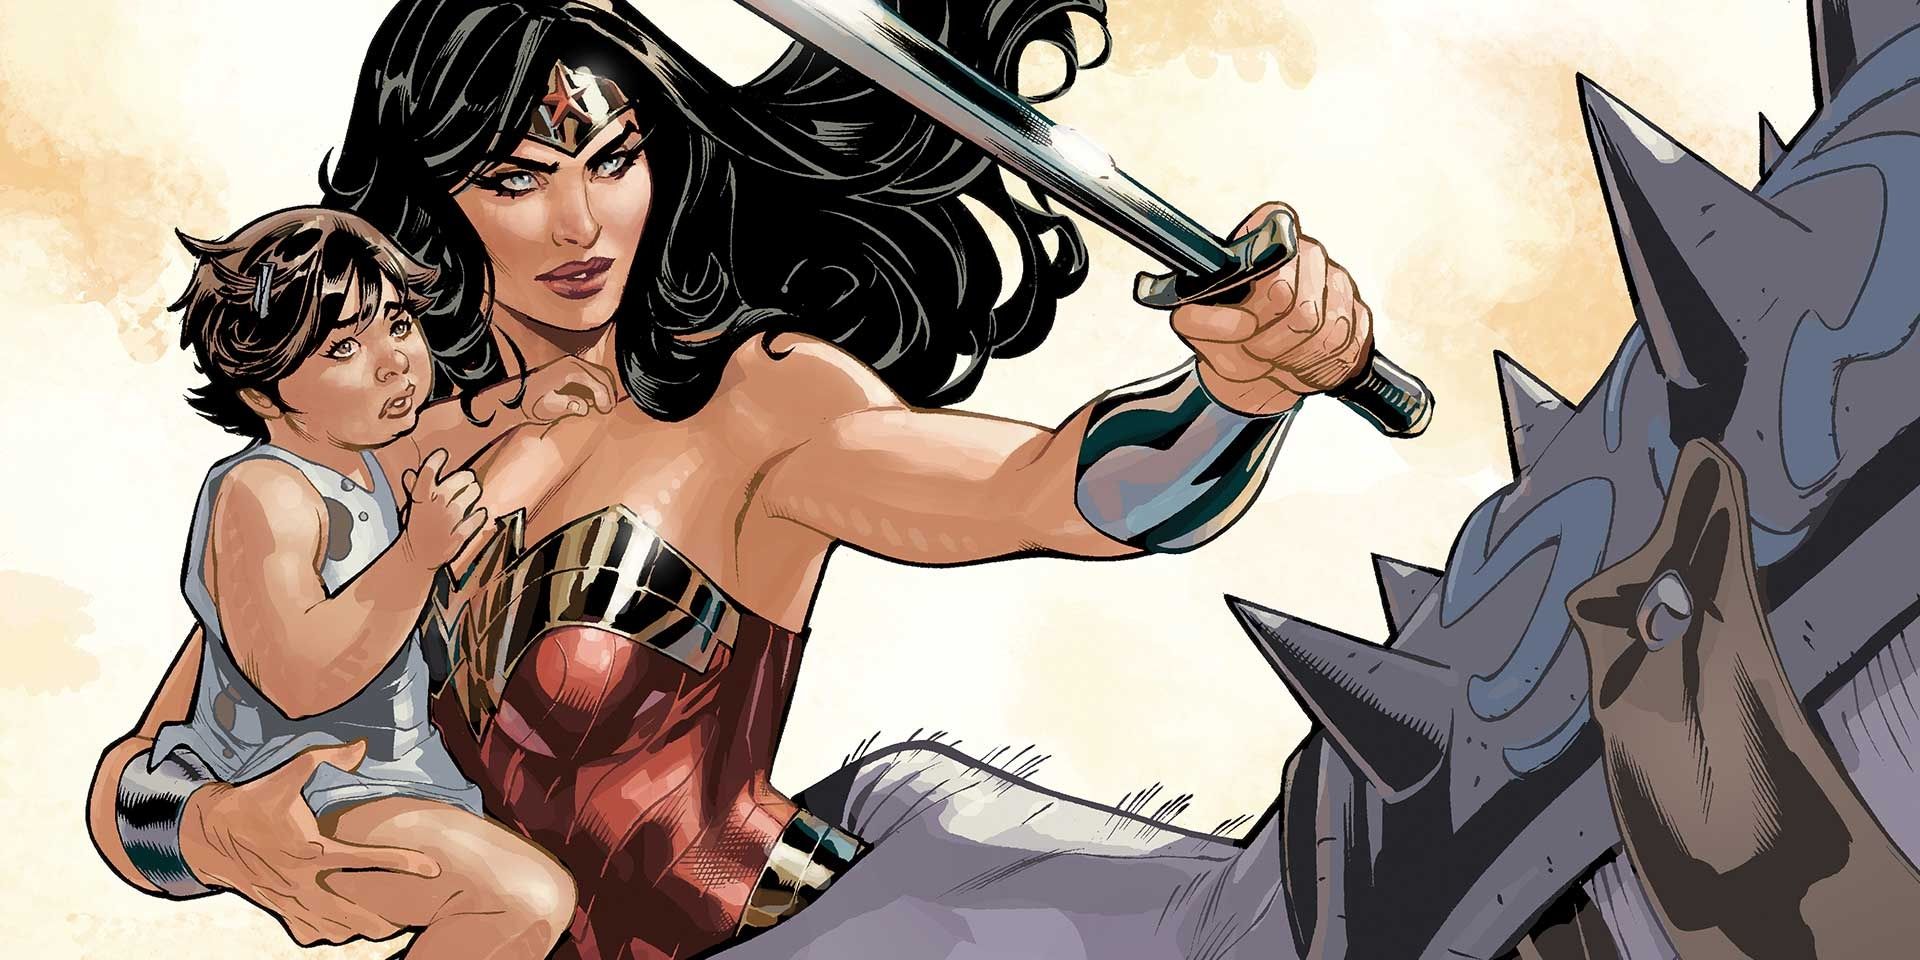 Wonder Woman with a sword, protecting a child